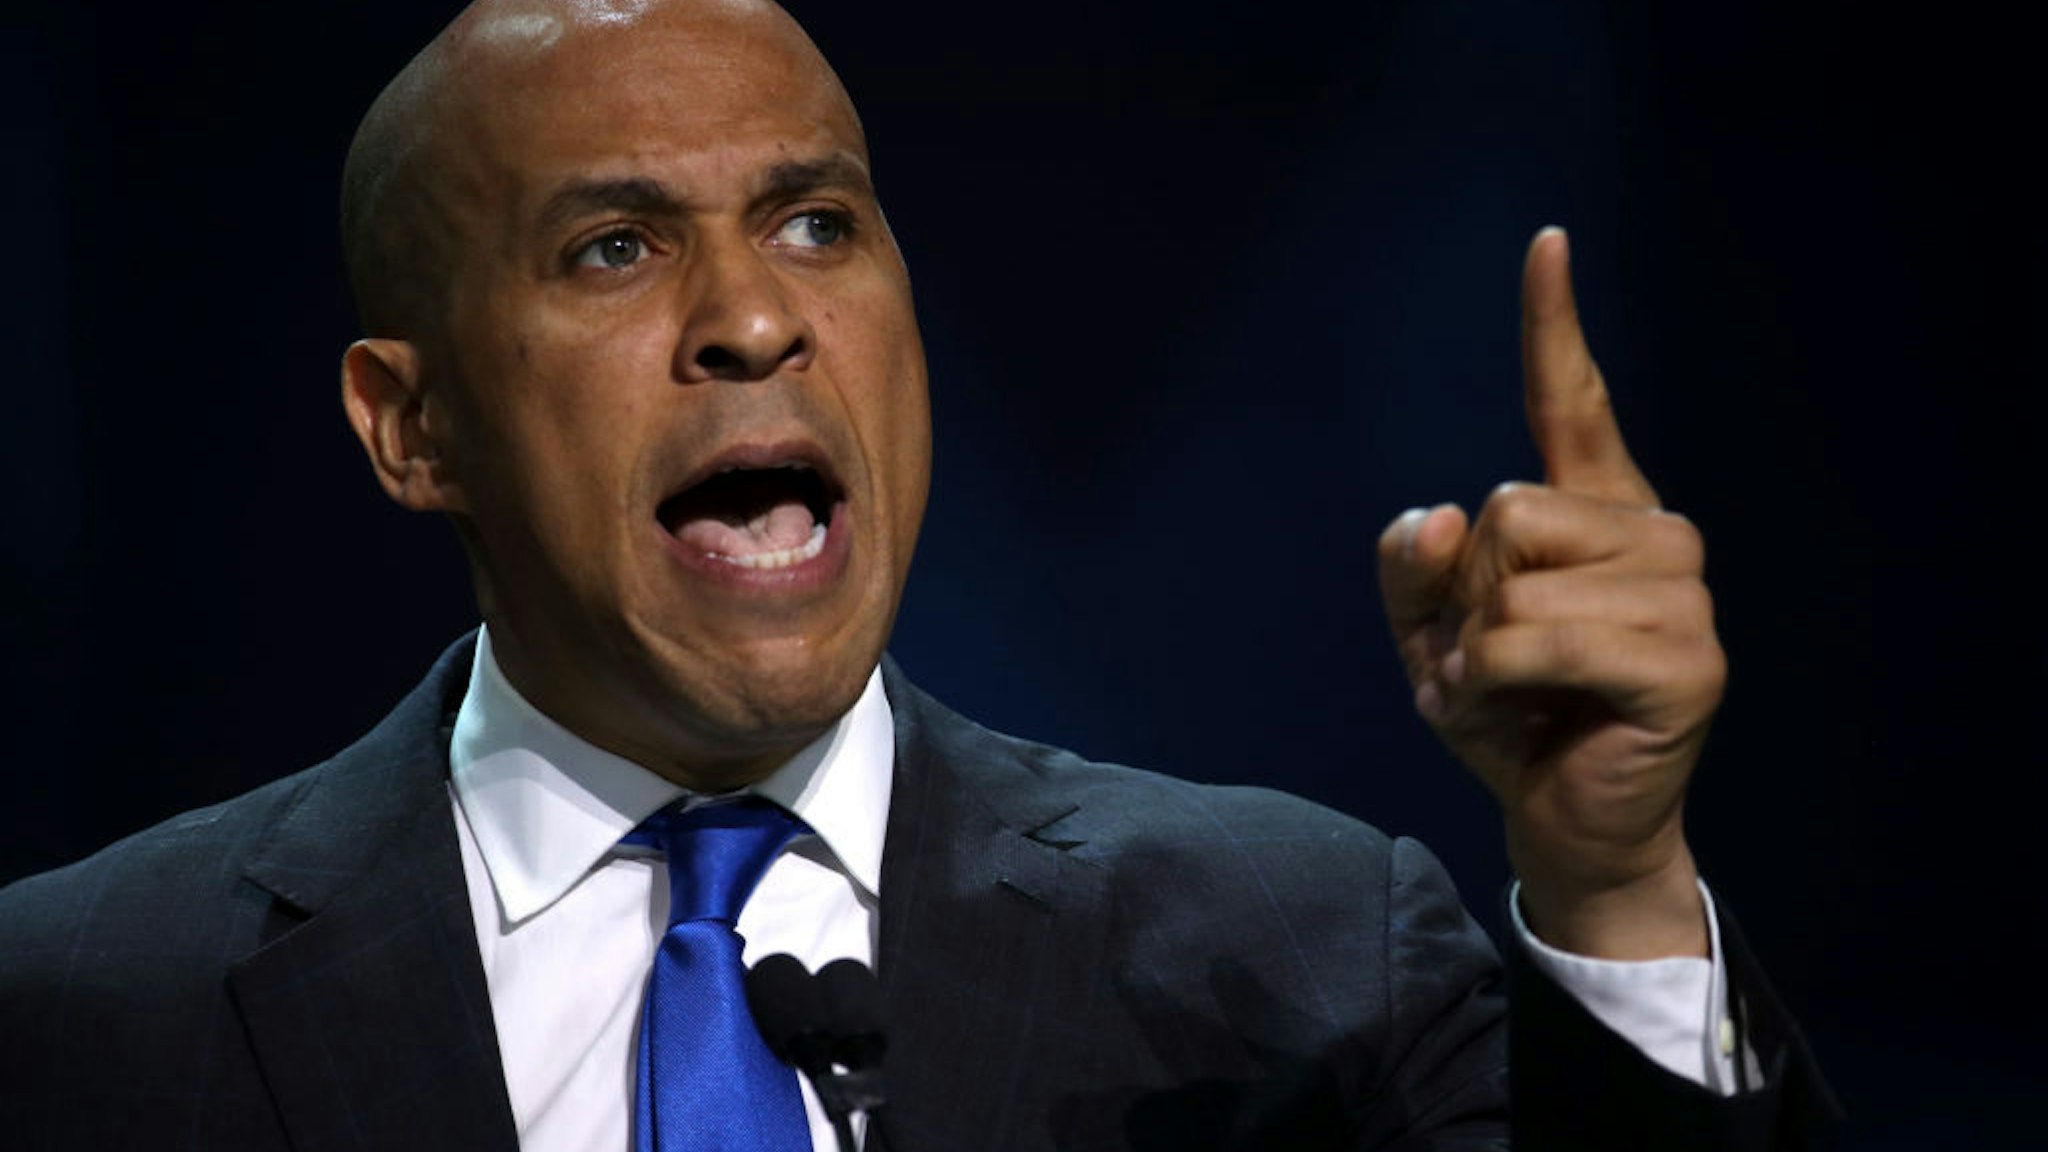 SAN FRANCISCO, CALIFORNIA - JUNE 01: Democratic presidential candidate U.S. Sen. Cory Booker (D-NJ) speaks during the California Democrats 2019 State Convention at the Moscone Center on June 01, 2019 in San Francisco, California. Several Democratic presidential candidates are speaking at the California Democratic Convention that runs through Sunday.